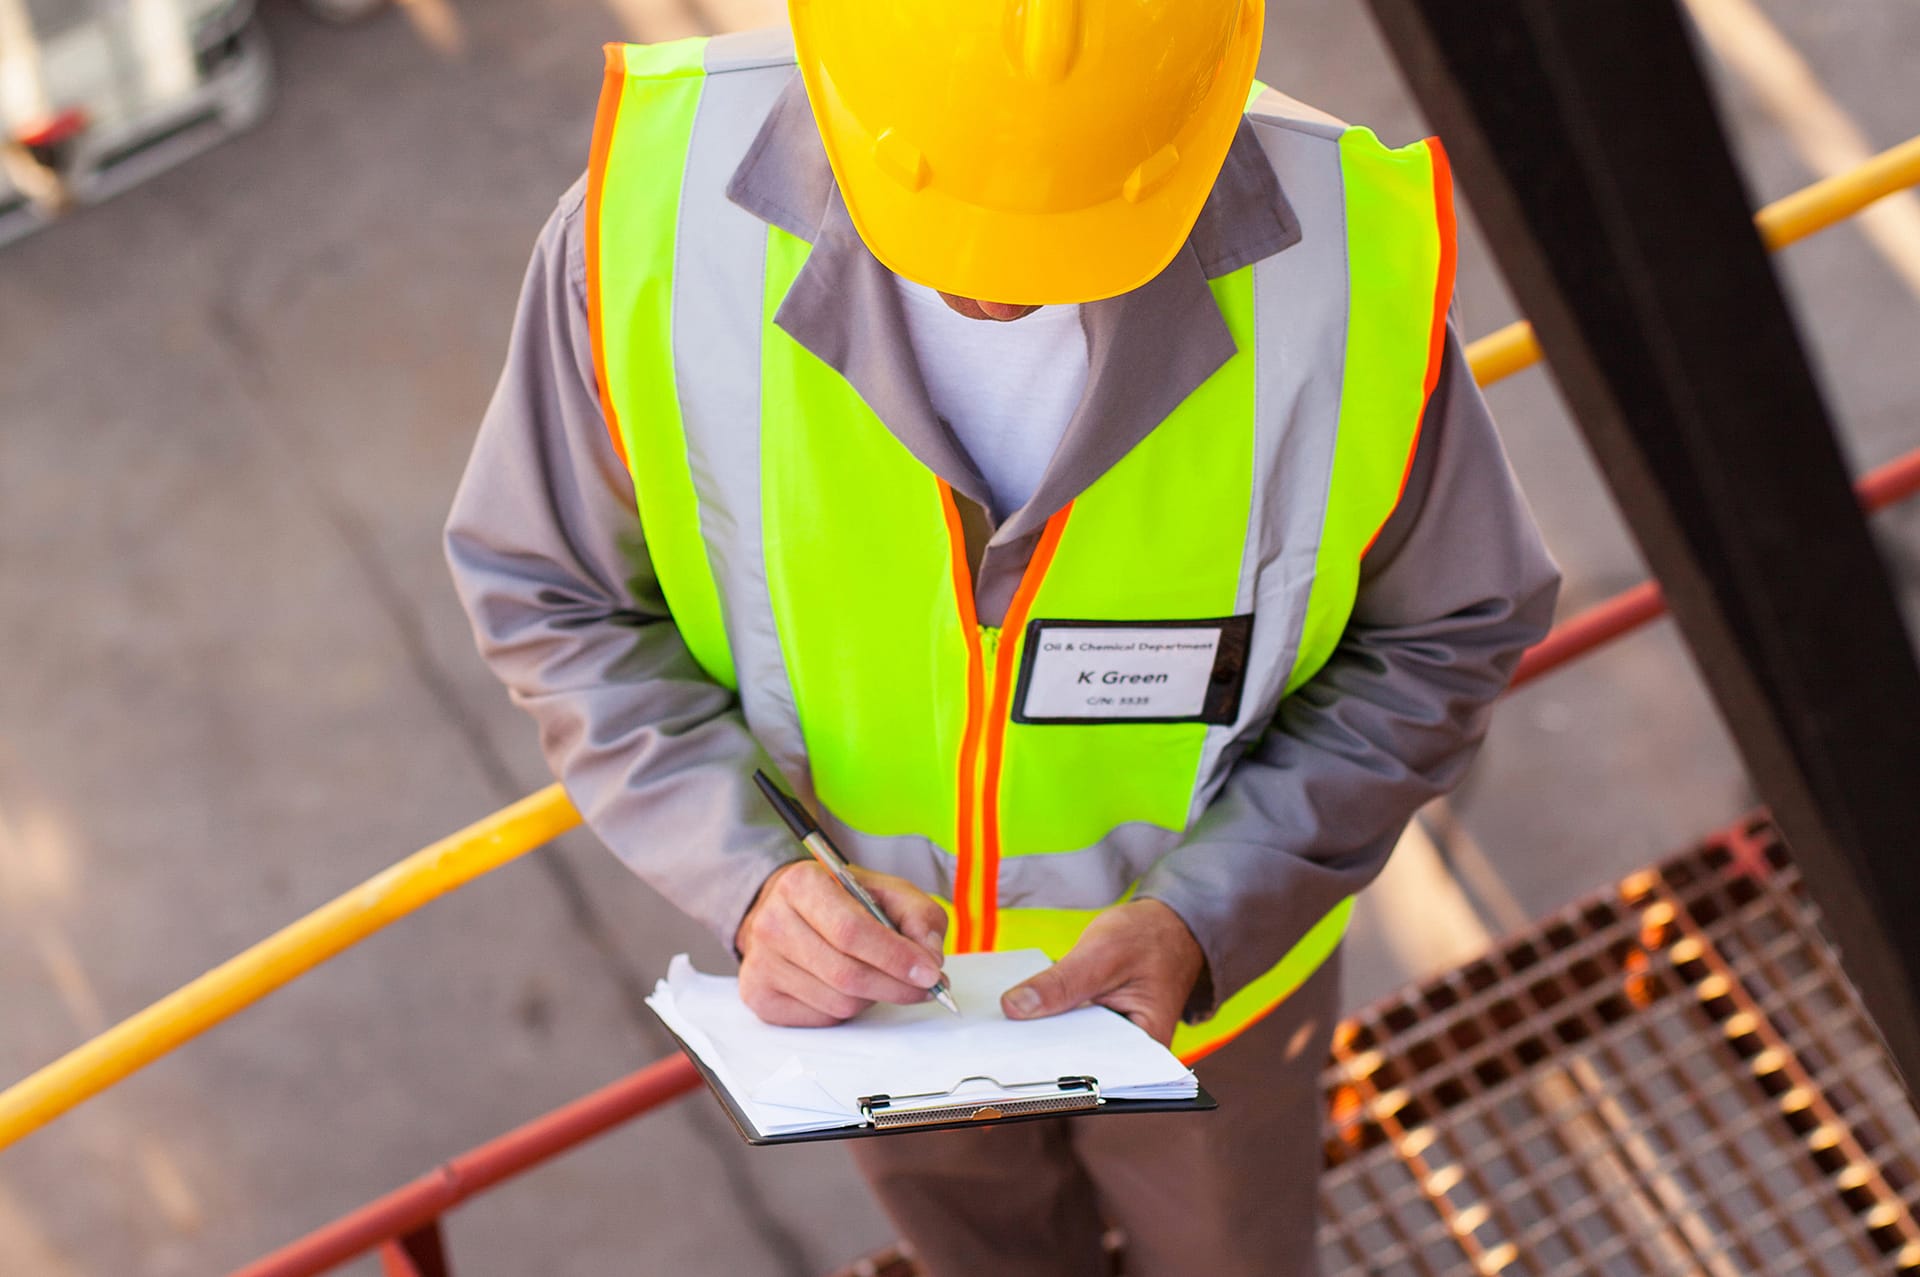 Winning OSHA Over: How the Small Details Help You Pass the Big Test